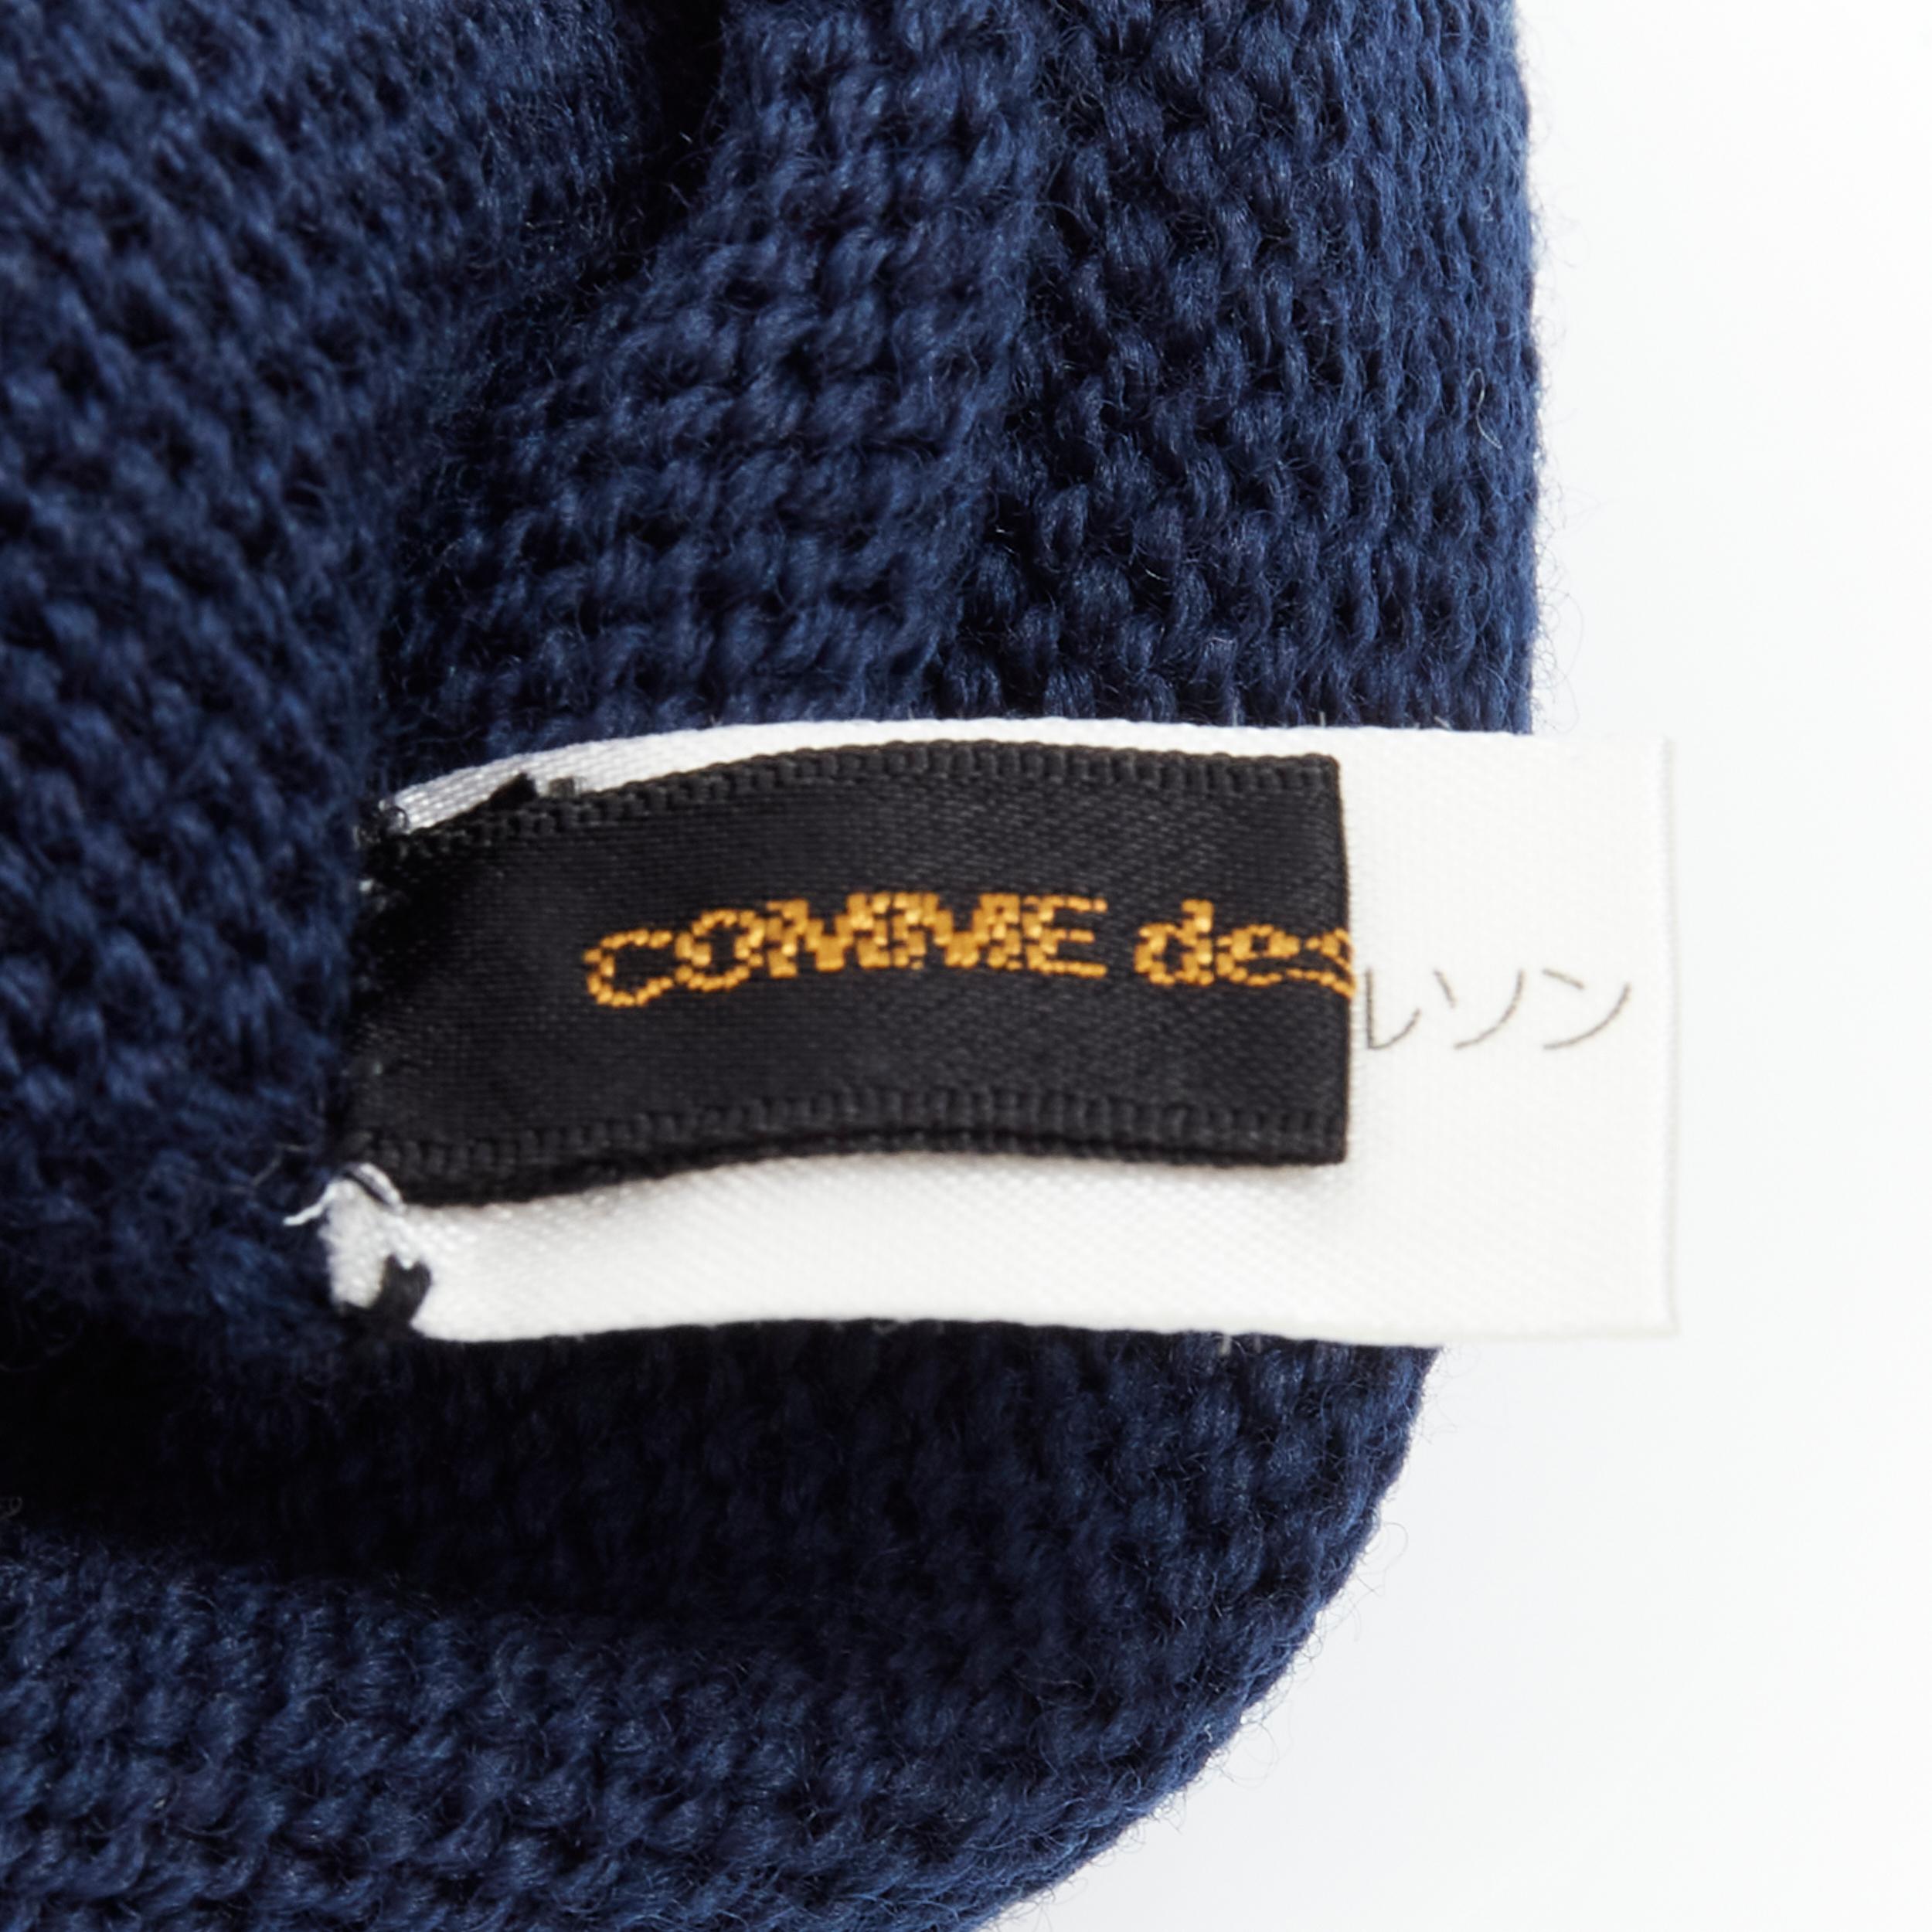 Women's COMME DES GARCONS 1996 Vintage Runway navy blue wool knit full opera gloves rare For Sale